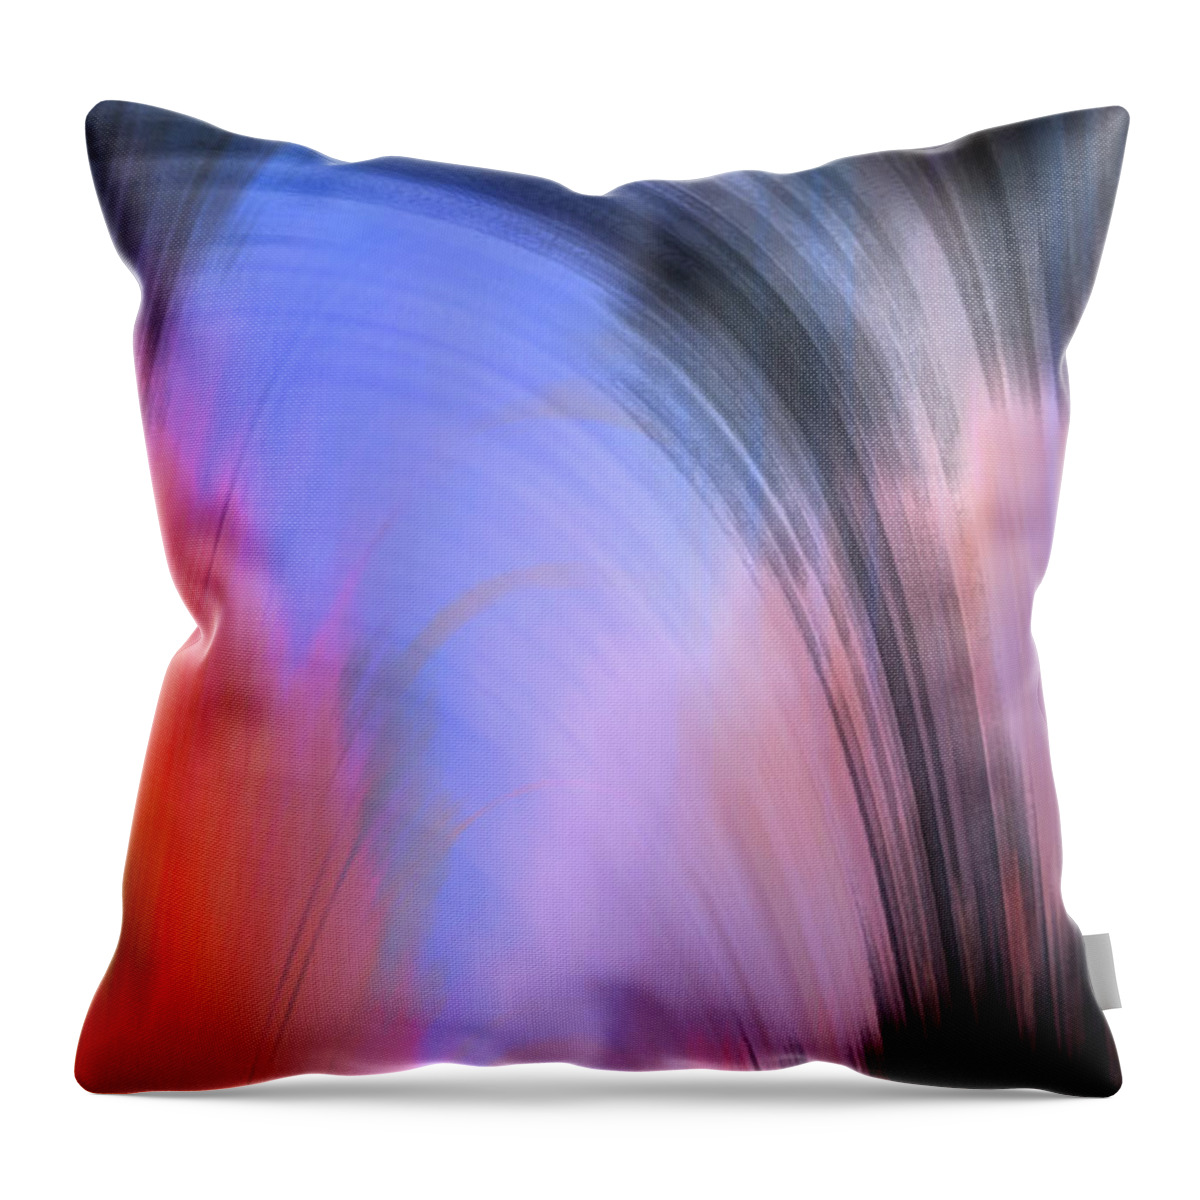 Colorful Throw Pillow featuring the digital art Hope - Hoffnung by Gerlinde Keating